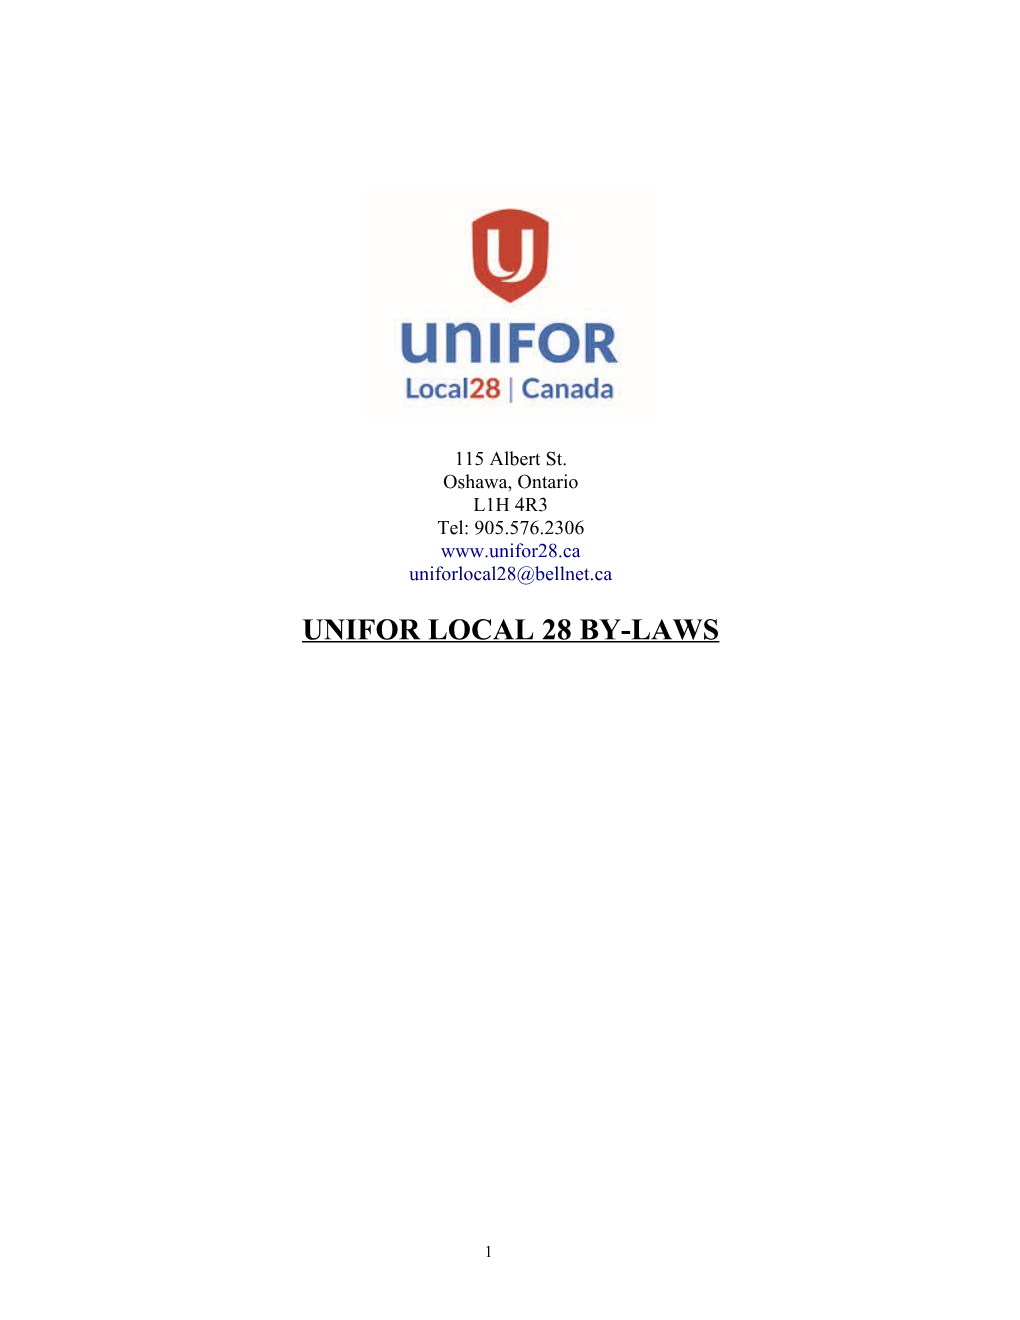 Unifor Local 28 By-Laws